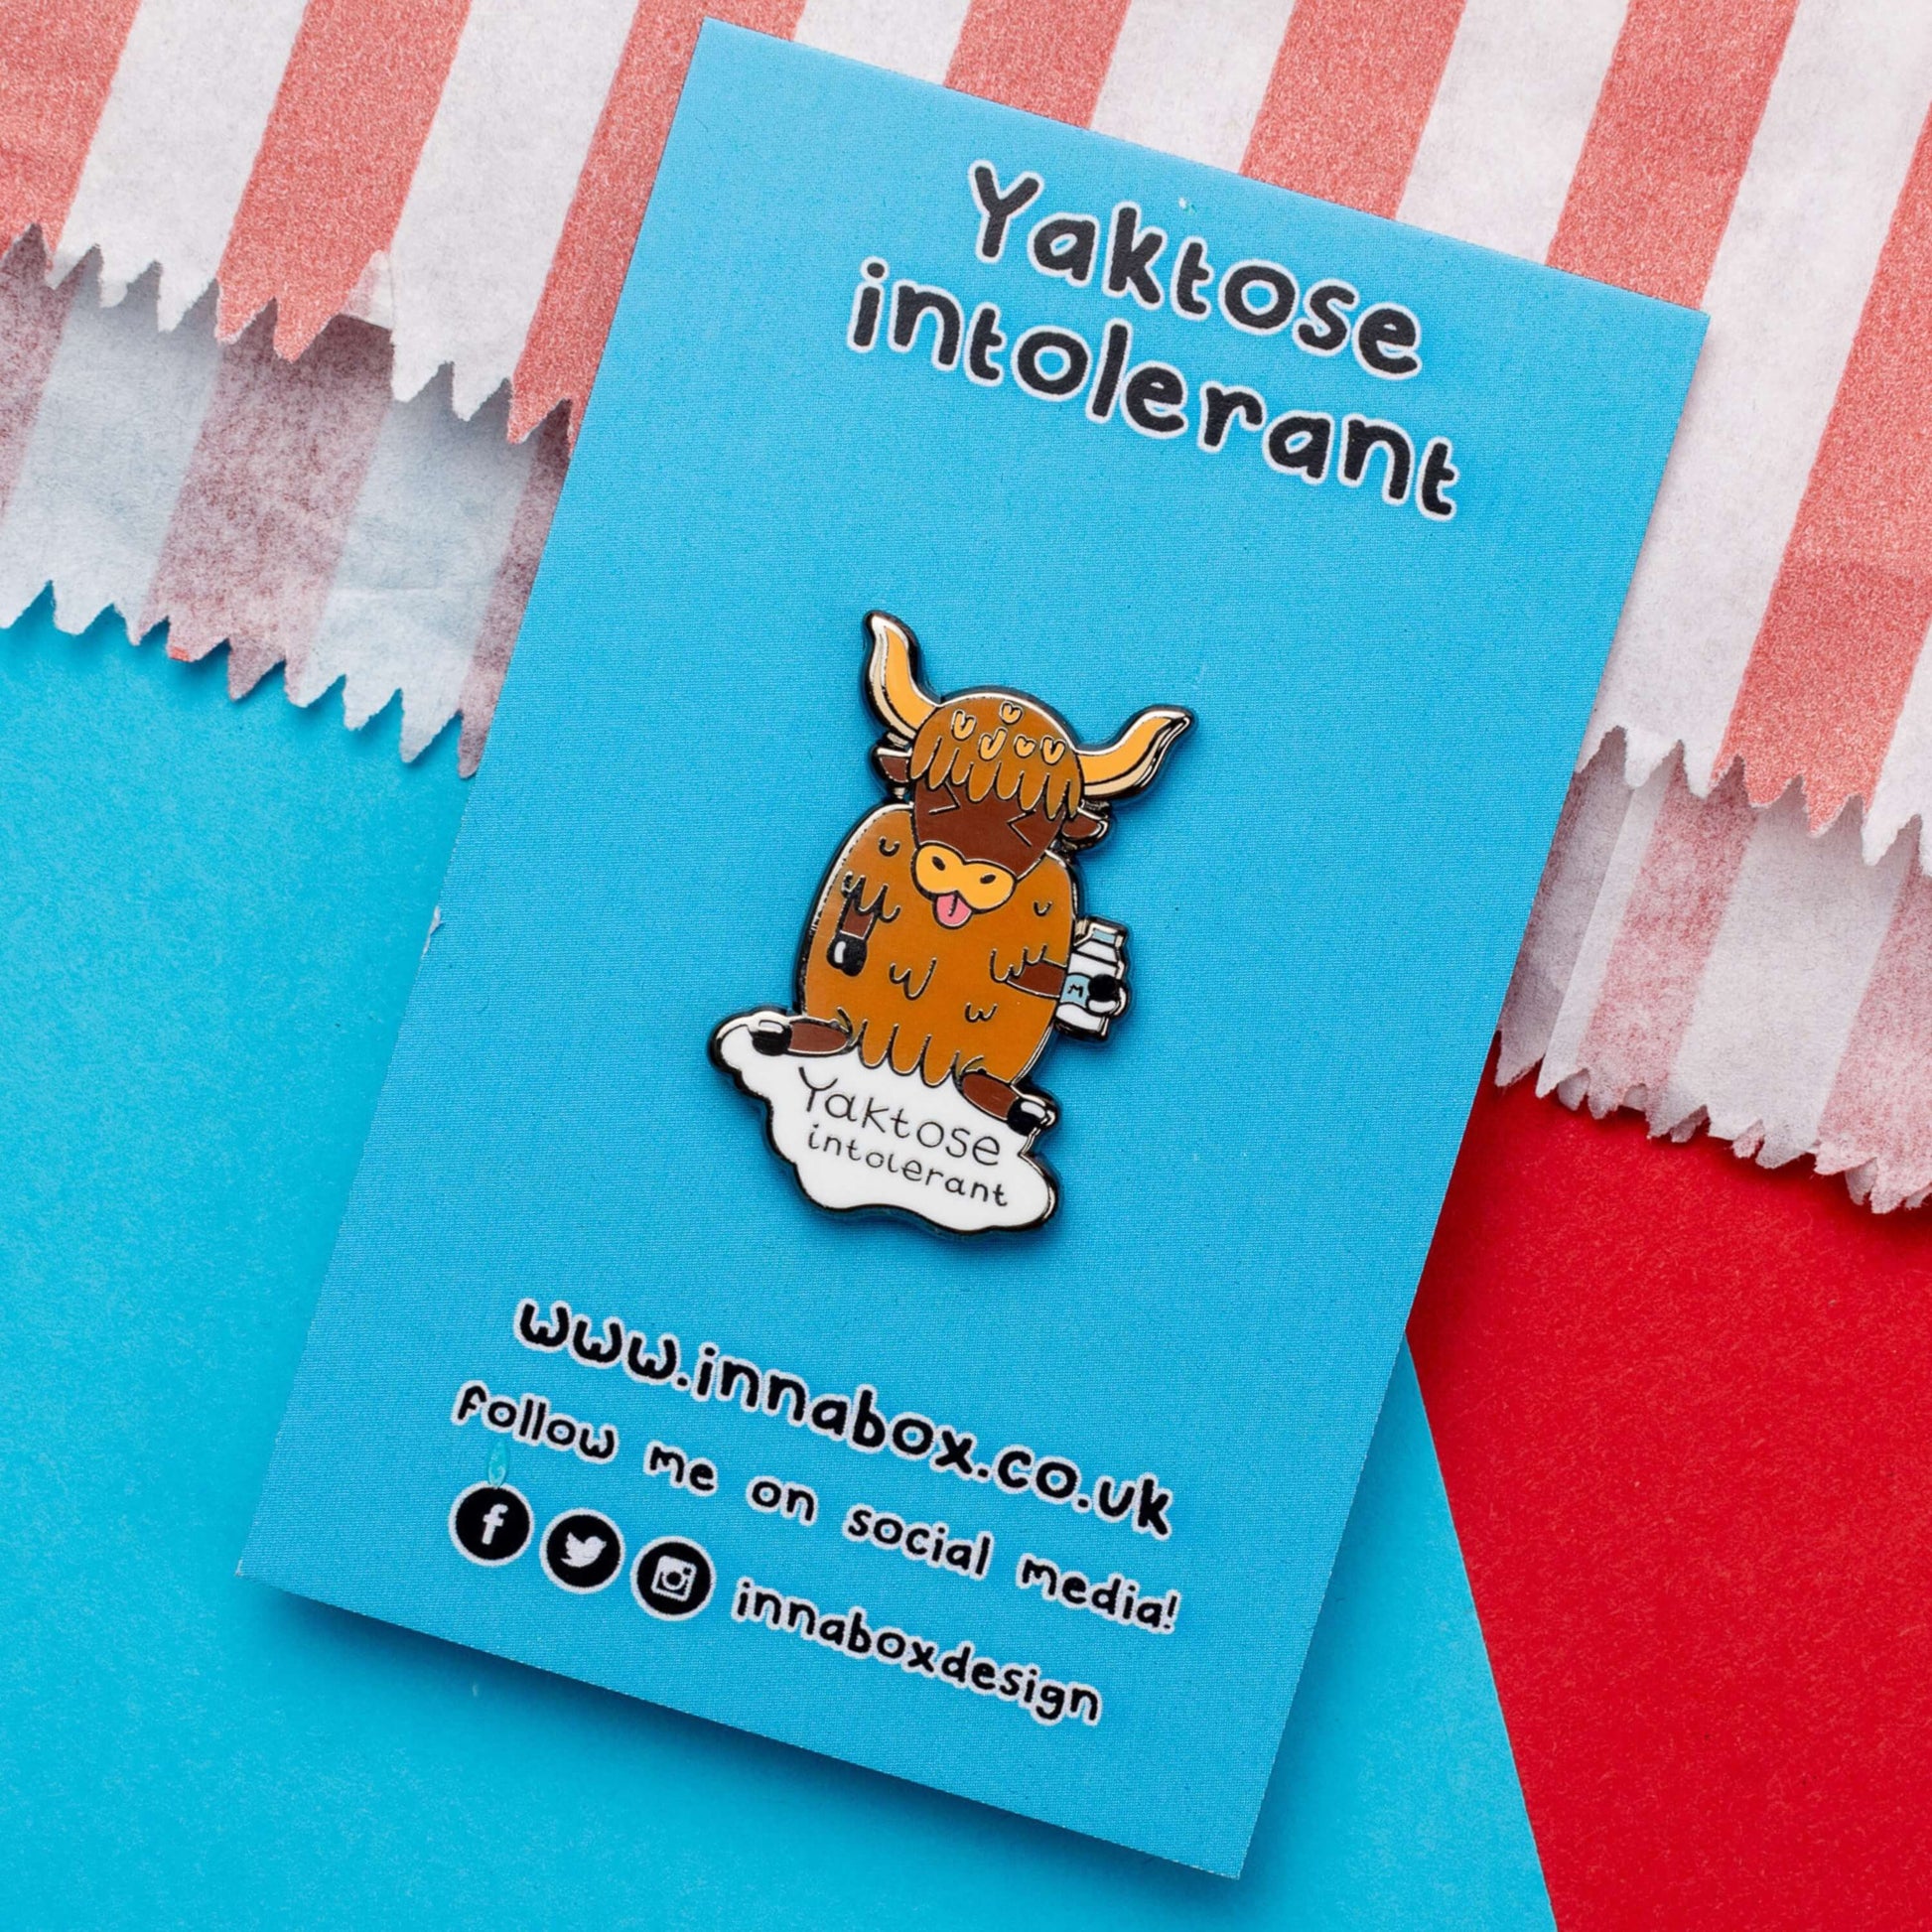 Yaktose Intolerant Enamel Pin - Lactose Intolerant on blue backing card laying on a blue and red background. The enamel pin is a yak sat holding a bottle of milk with it's tongue out looking disgusted. There is a puddle of milk under the yak with black text that reads 'yaktose intolerant'. The hand drawn design is made to raise awareness for lactose intolerance.